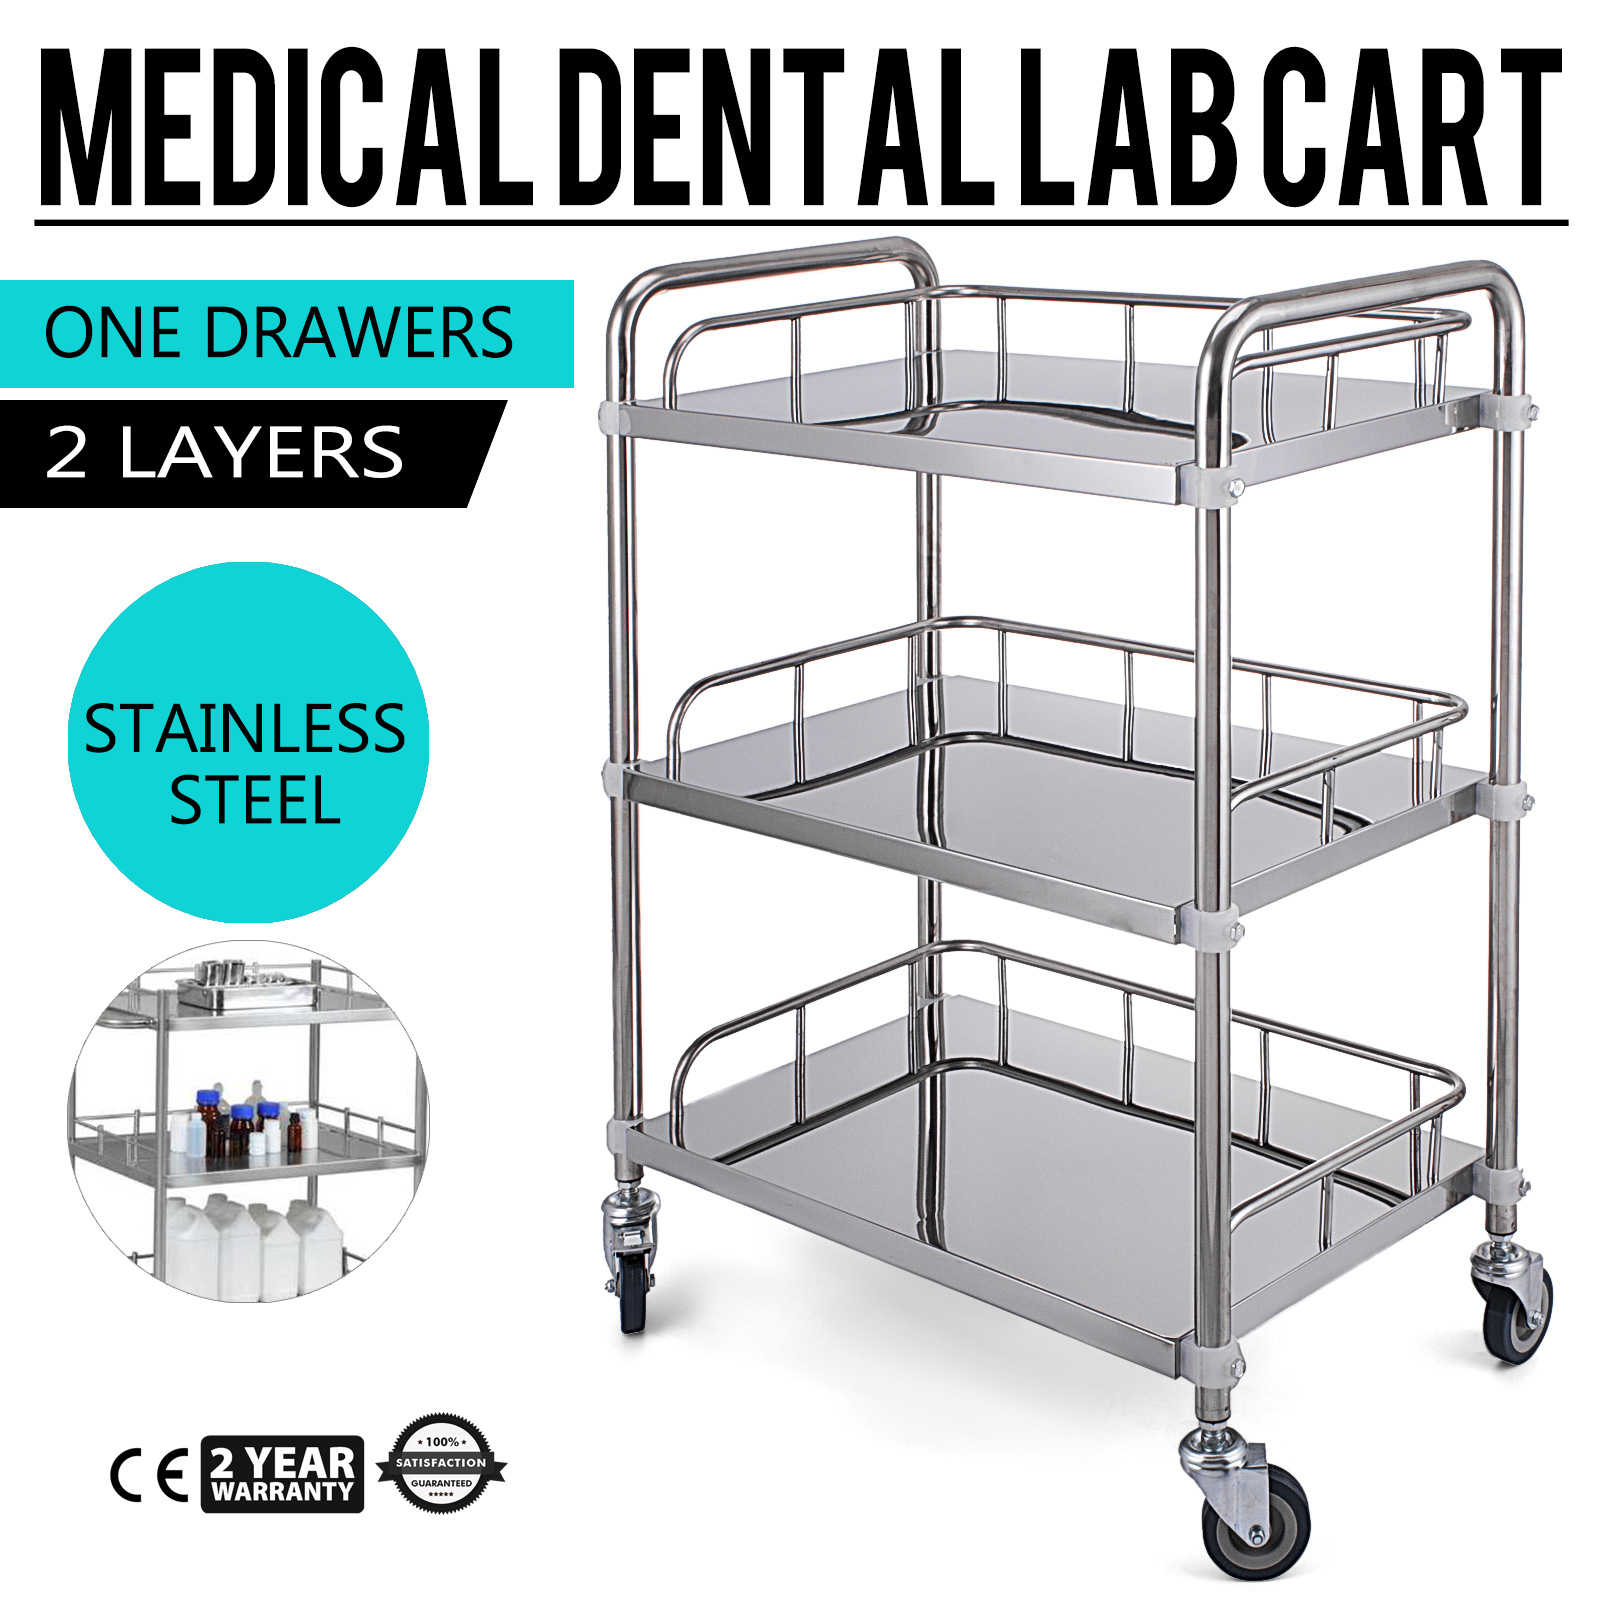 Rescue Vehicle Instrument Change Vehicles Stainless Steel Medical Cart LING AI DA MAI Two Layers Medical Trolley Assemble The Surgical Cart Load 100 Kg 